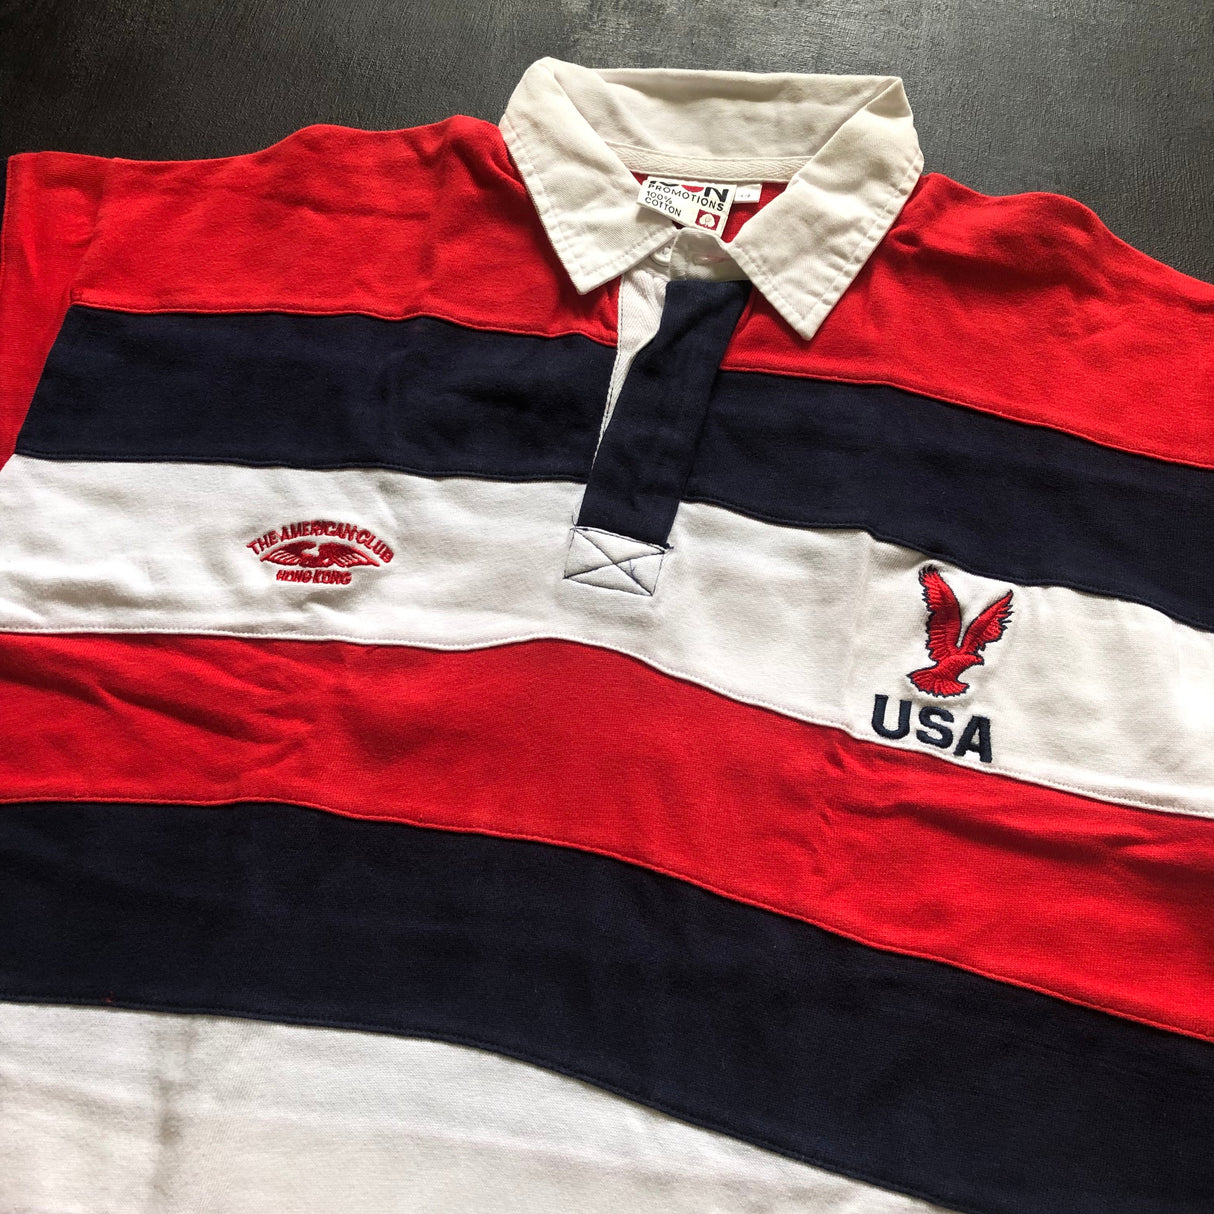 USA National Rugby Team Supporters Jersey 1997 Hong Kong Sevens XL Underdog Rugby - The Tier 2 Rugby Shop 